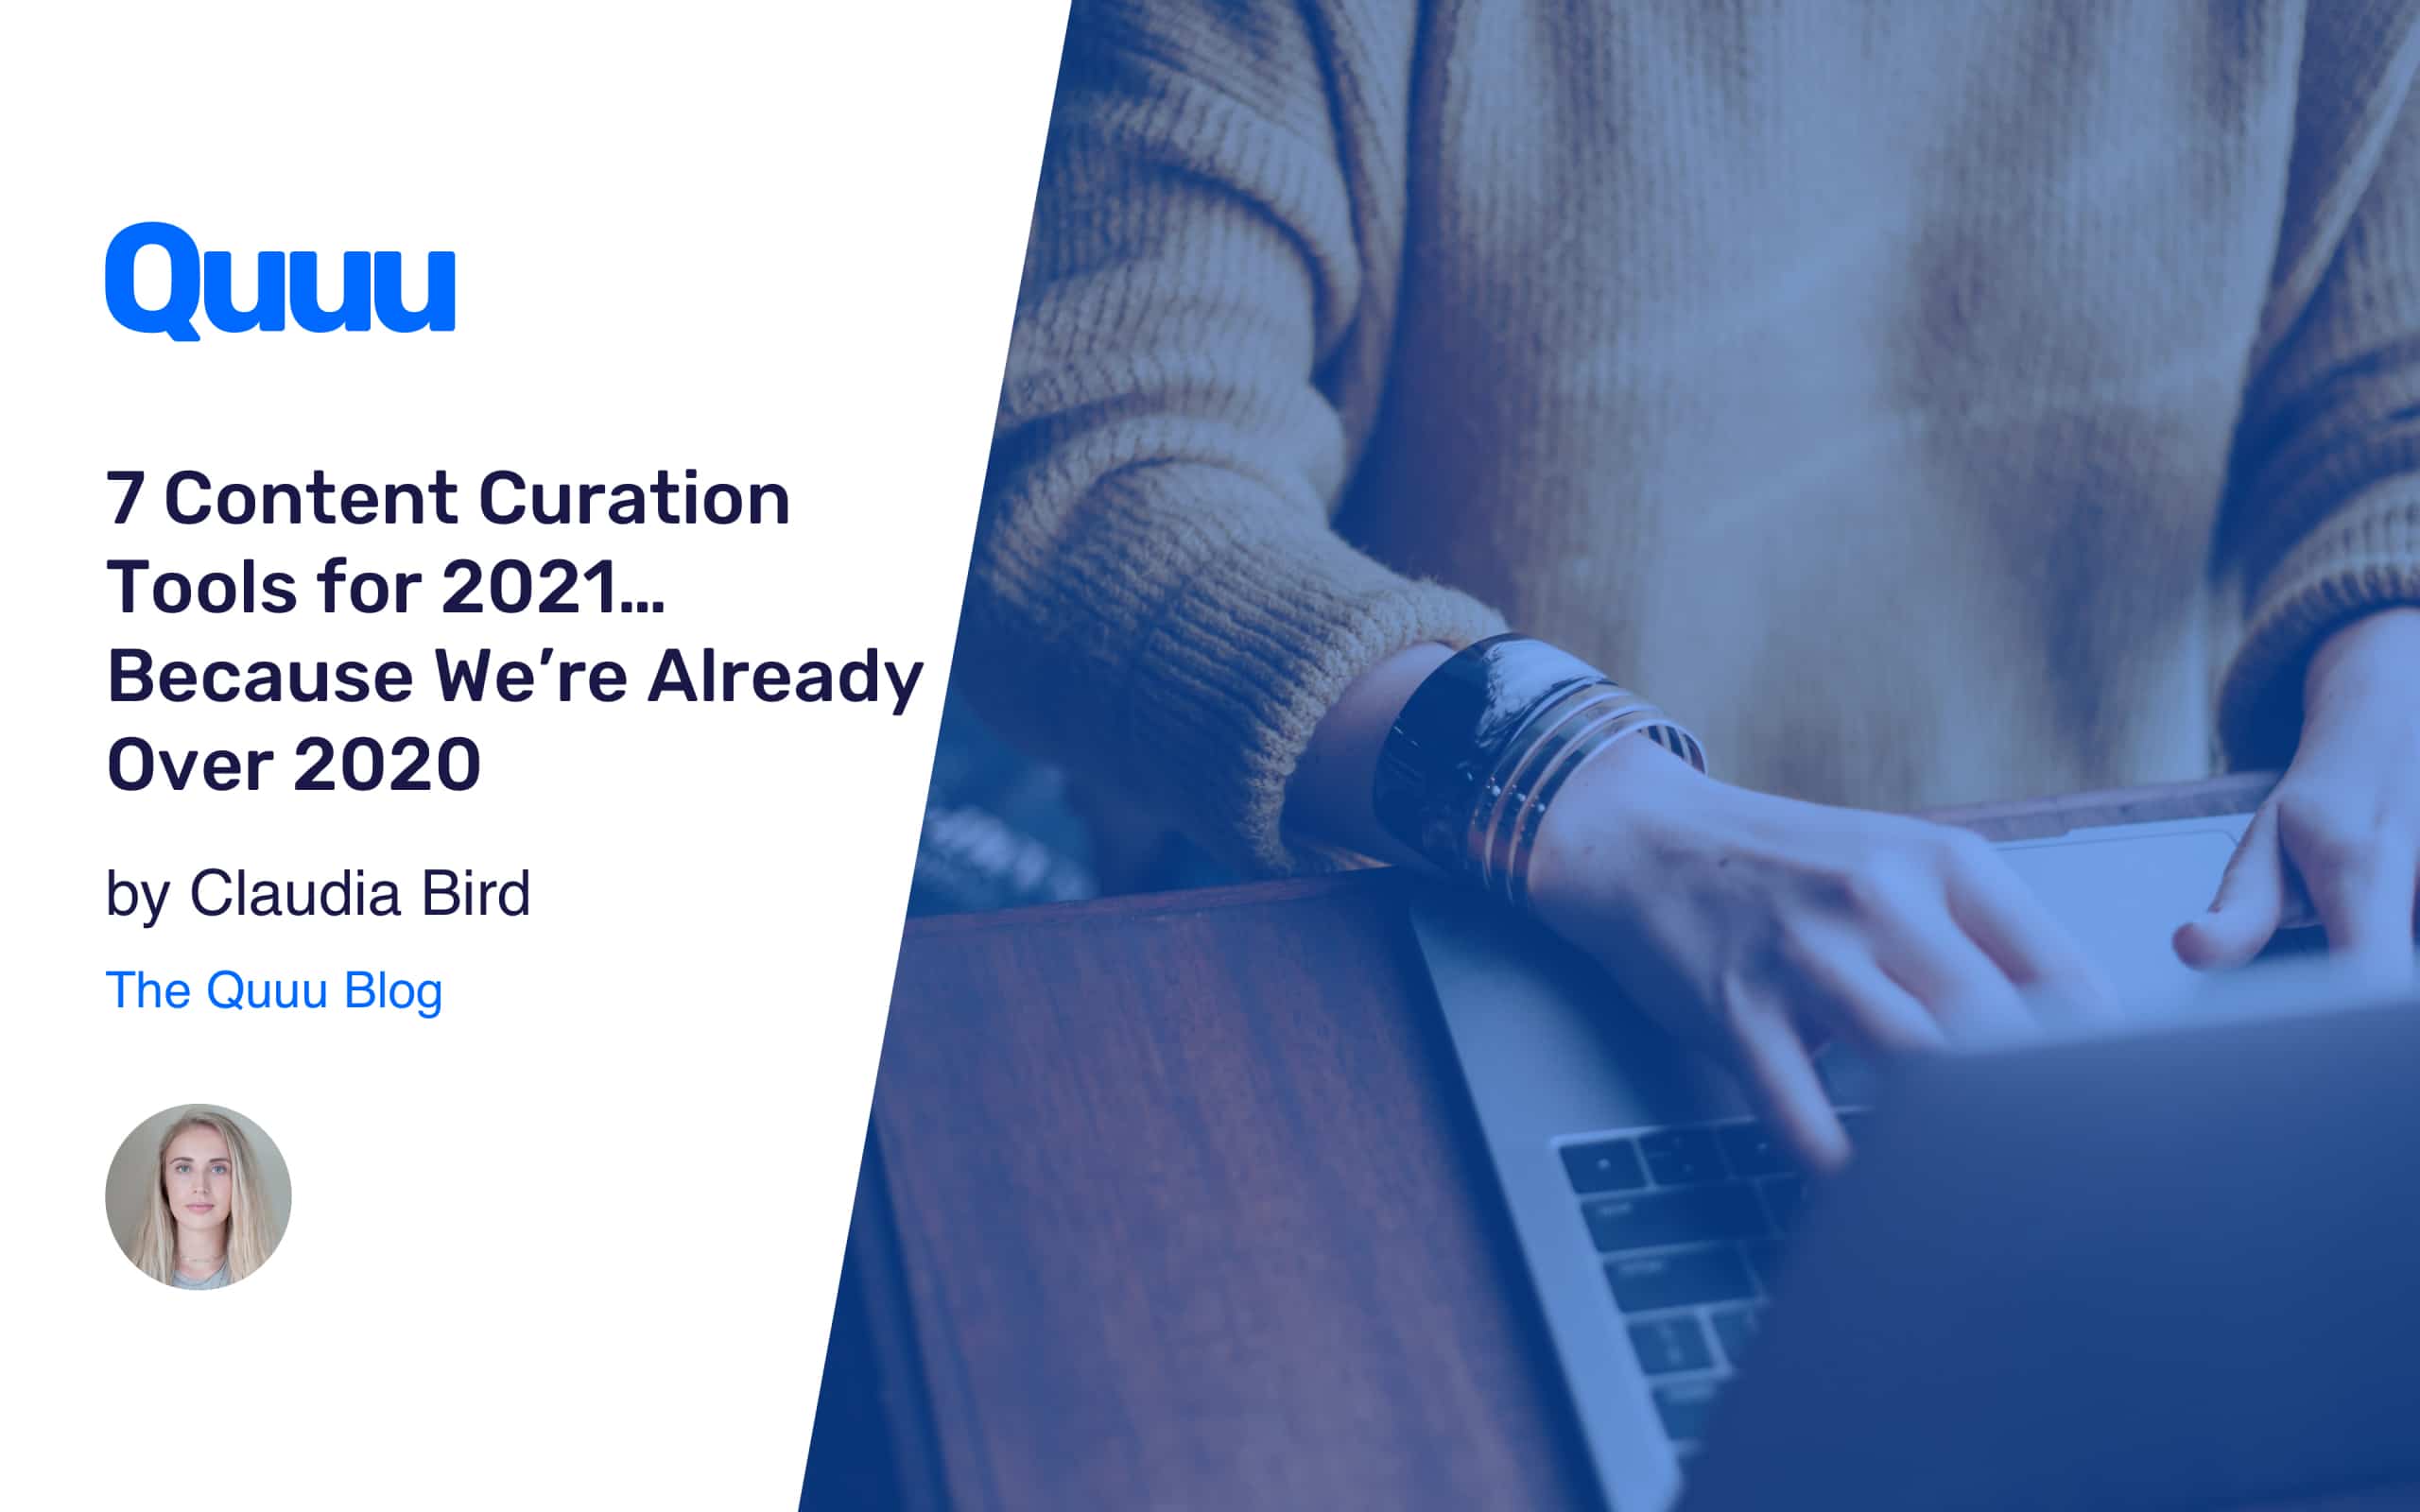 7 Content Curation Tools for 2021... Because We're Already Over 2020